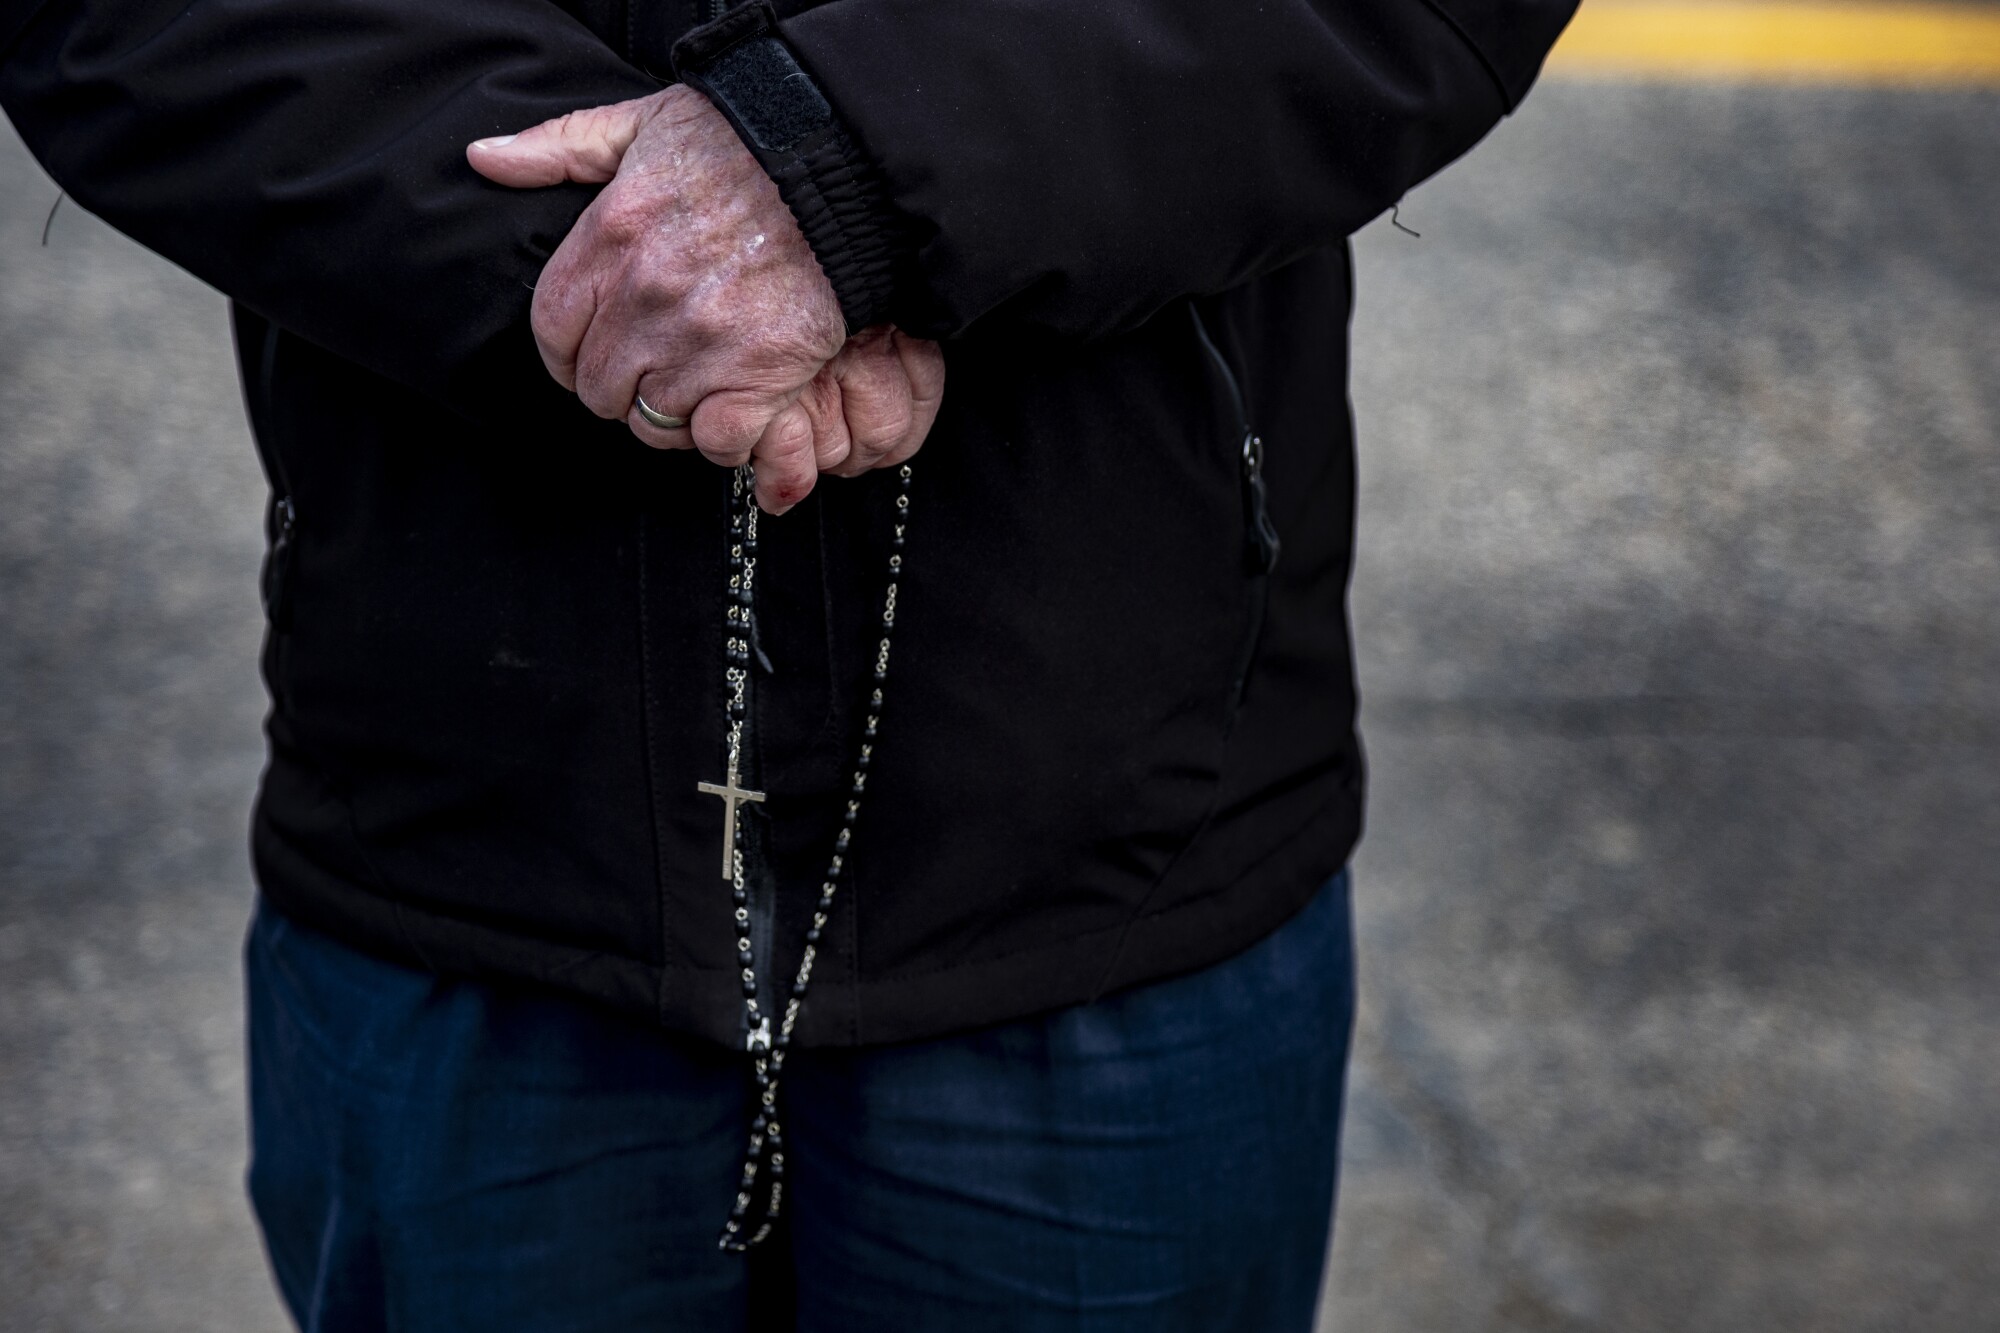 An antiabortion protester holds a rosary as he prays 